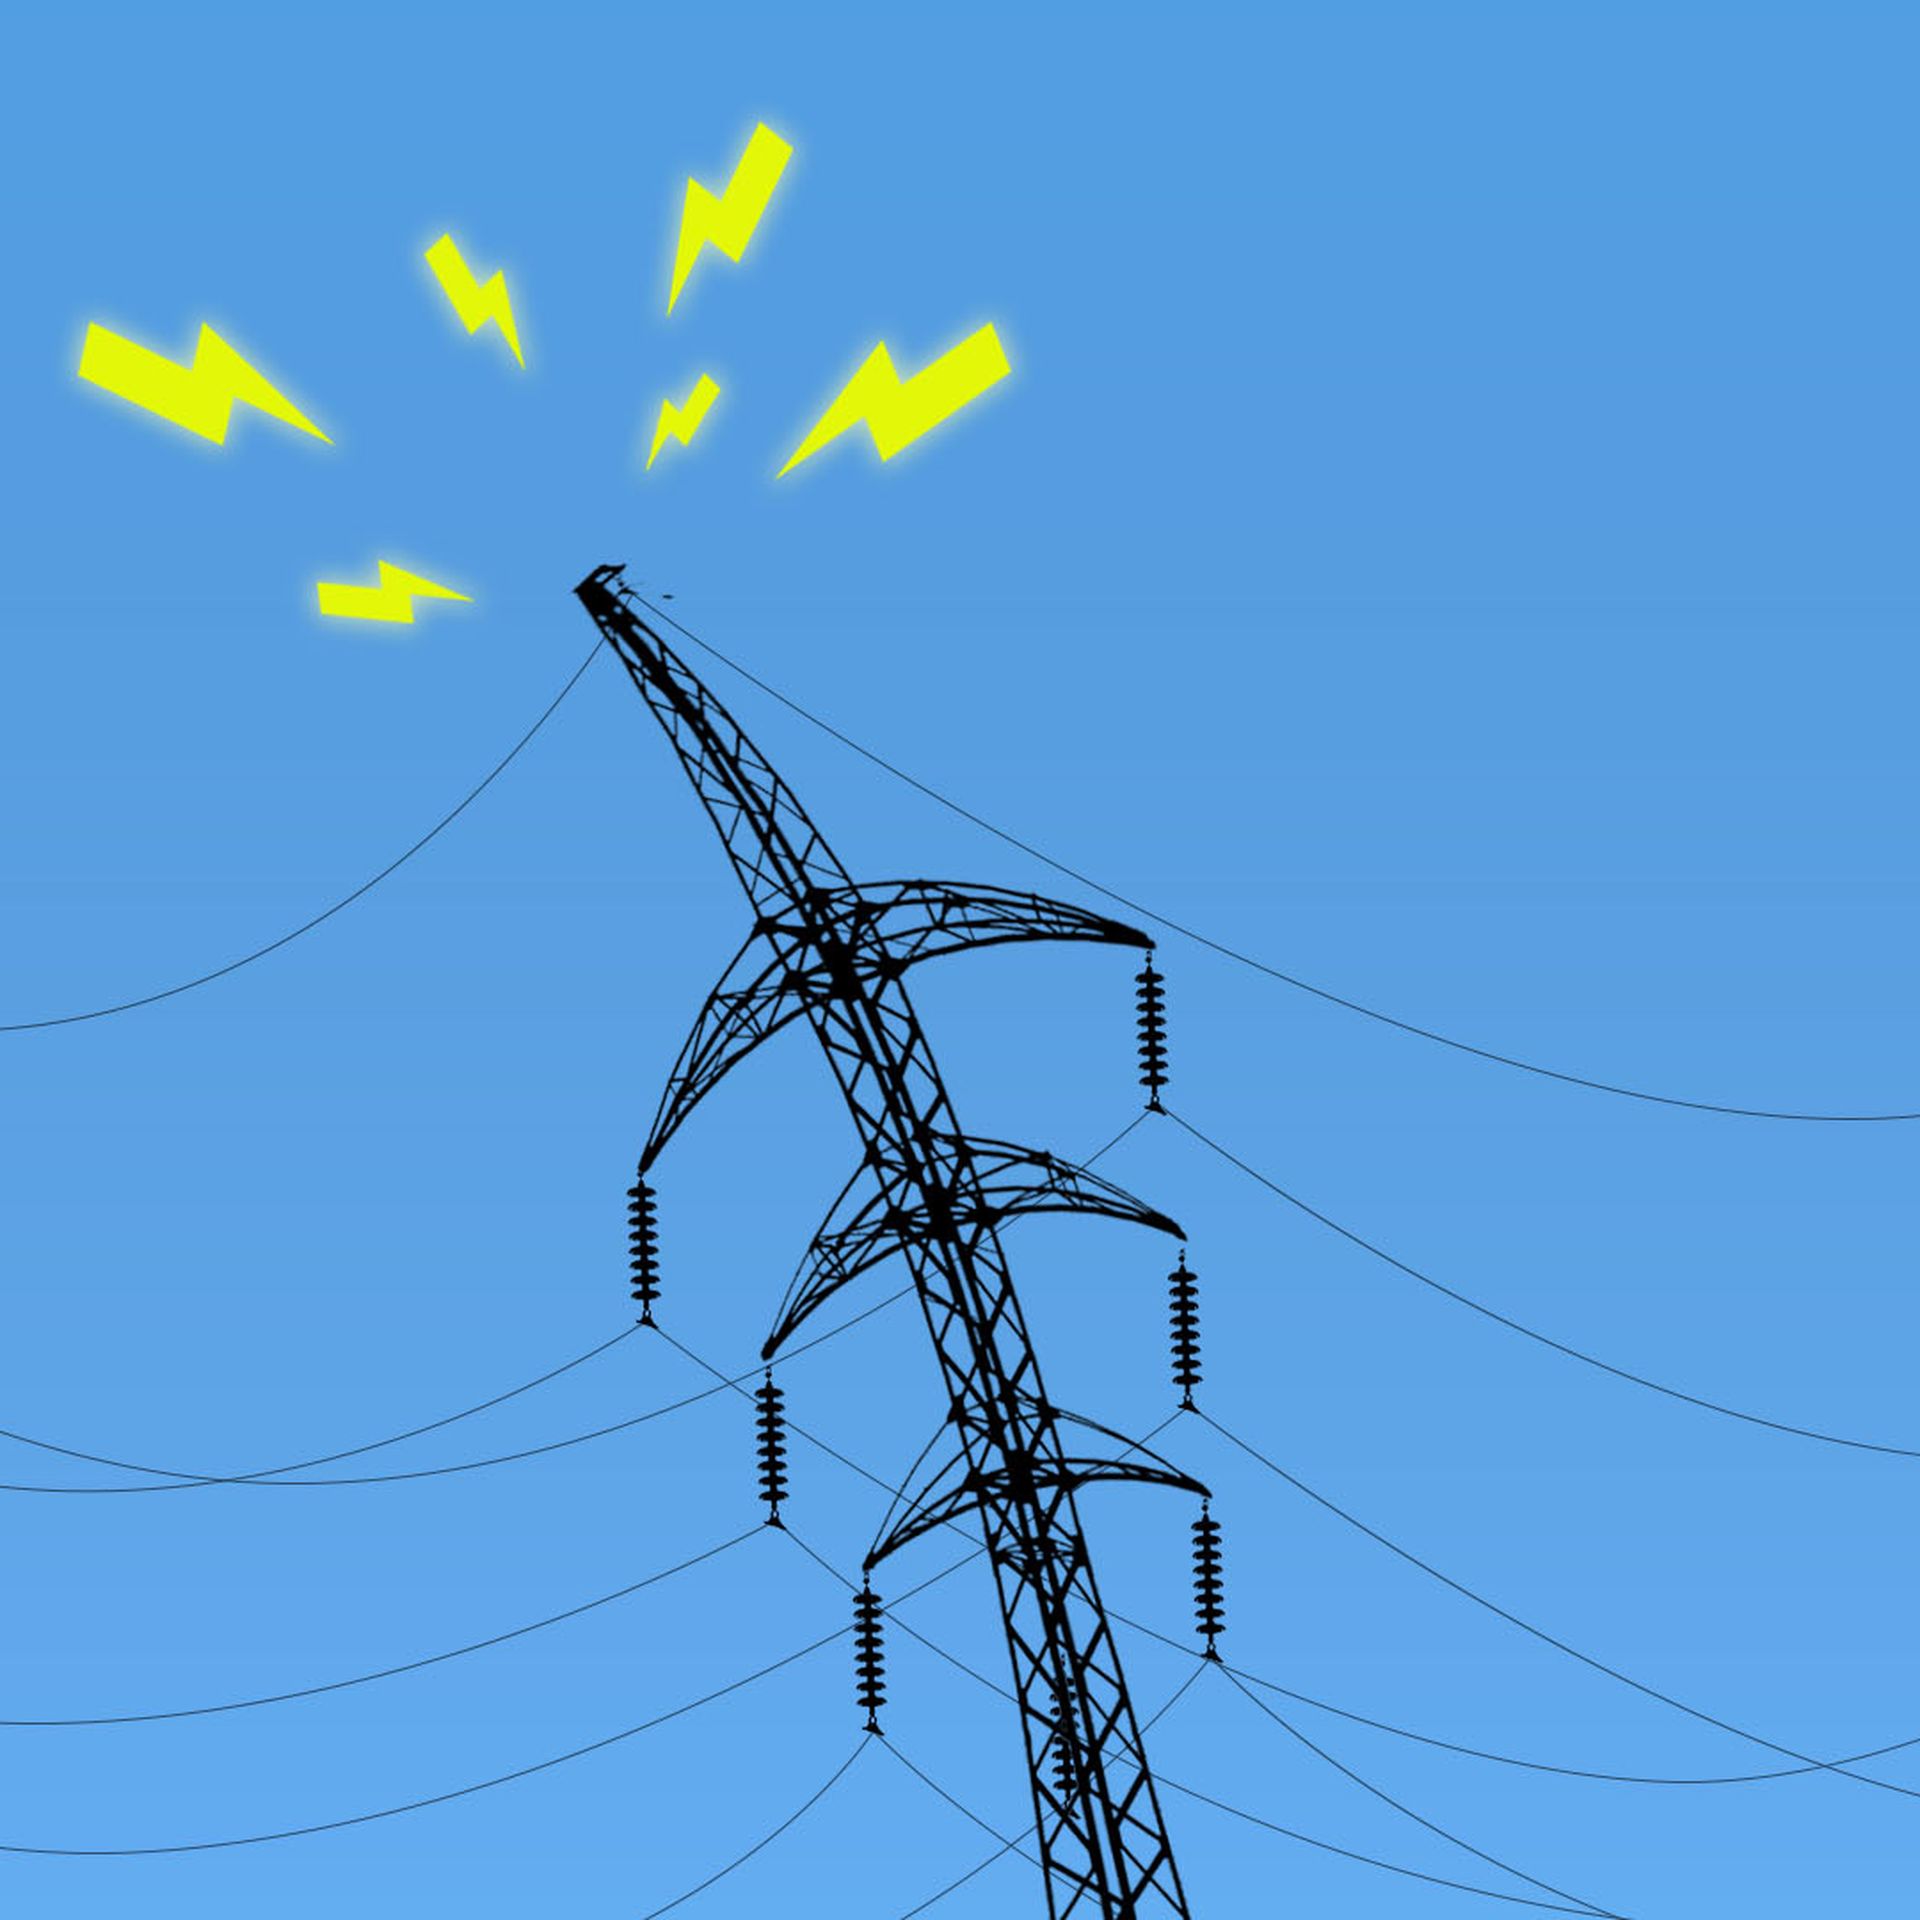 Illustration of a power line struggling under the weight of electrical wires